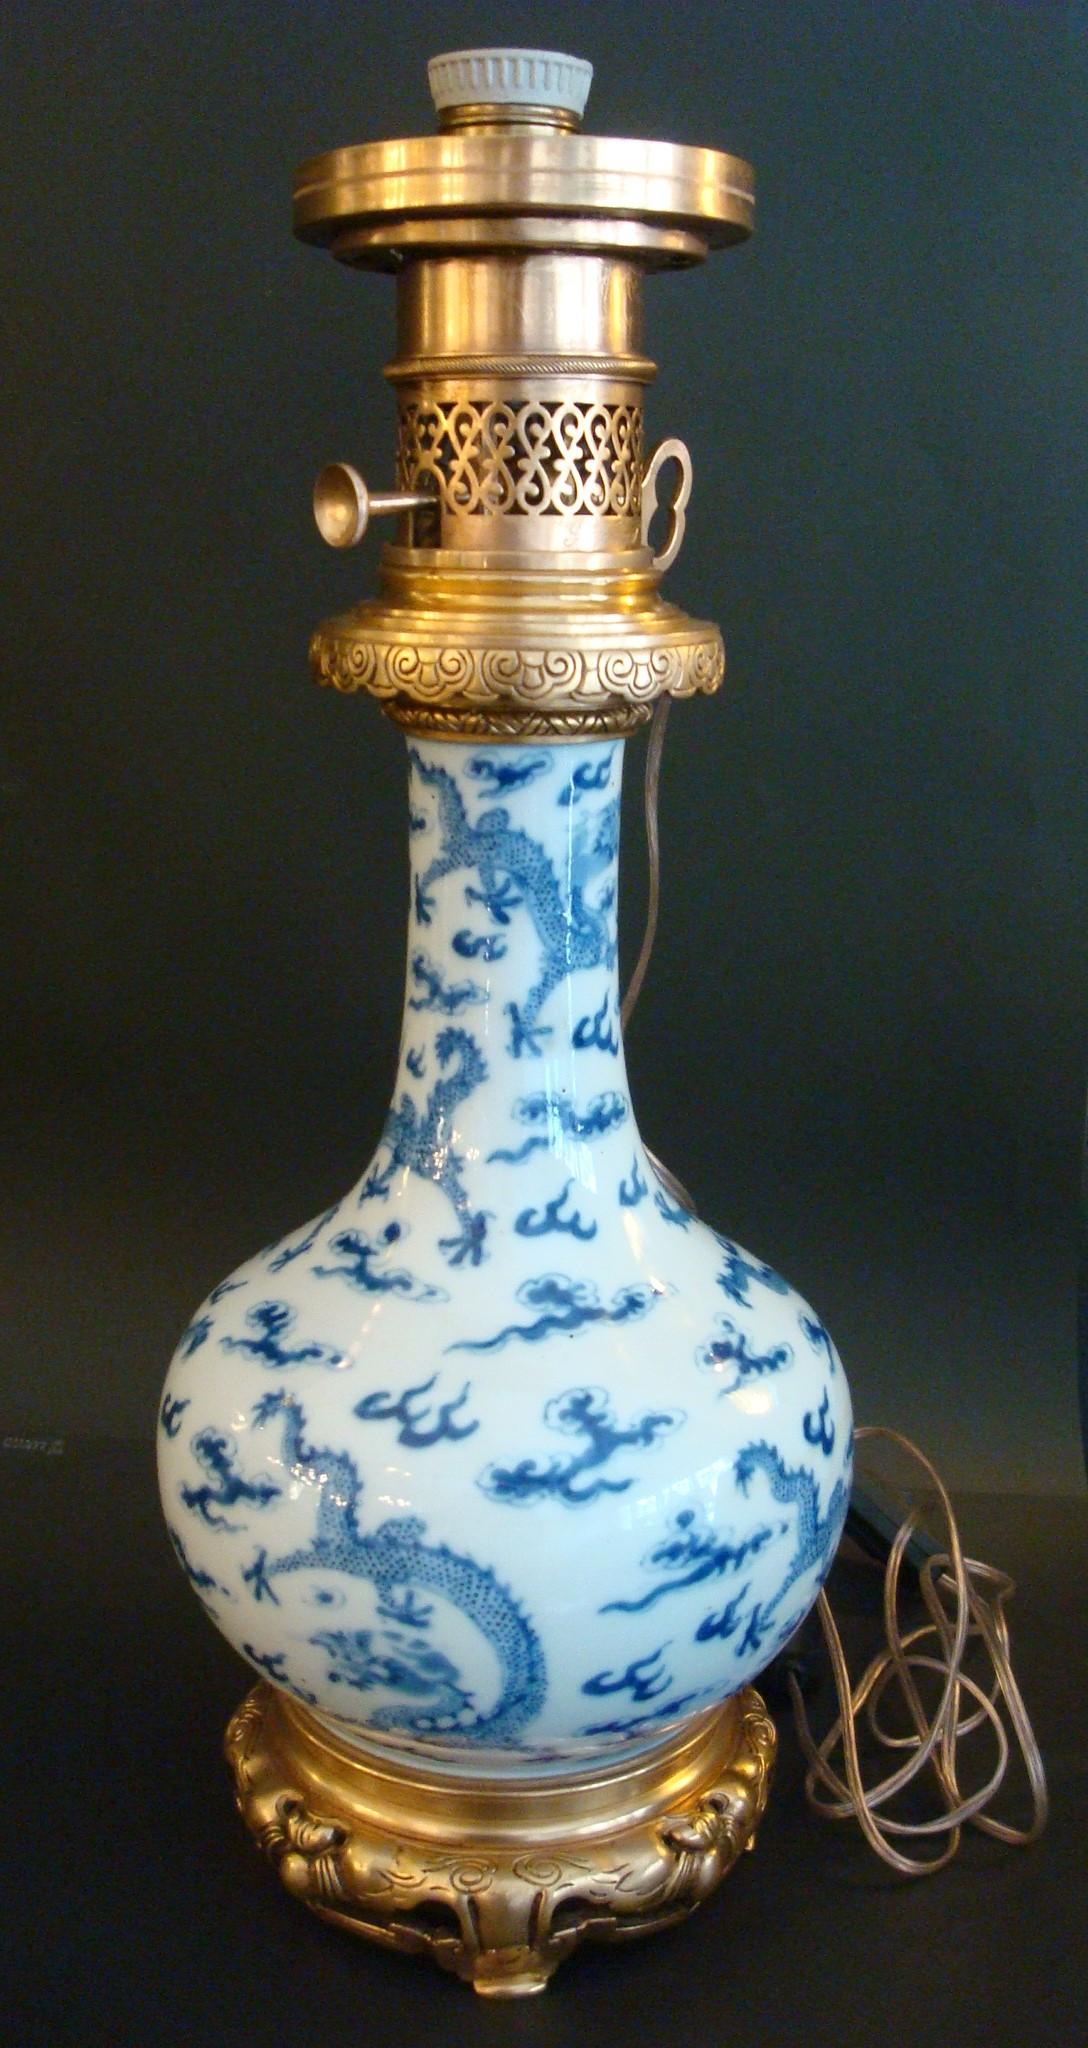 Pair of ormolu-mounted attr. Theodore Deck Chinese white and blue Dragons vases mounted as table lamps 19th century.
Each in the Chinese taste. The base of the fitment with plaque 'Gagneau 115 Rue Lafayette'
These beautiful table lamps have been